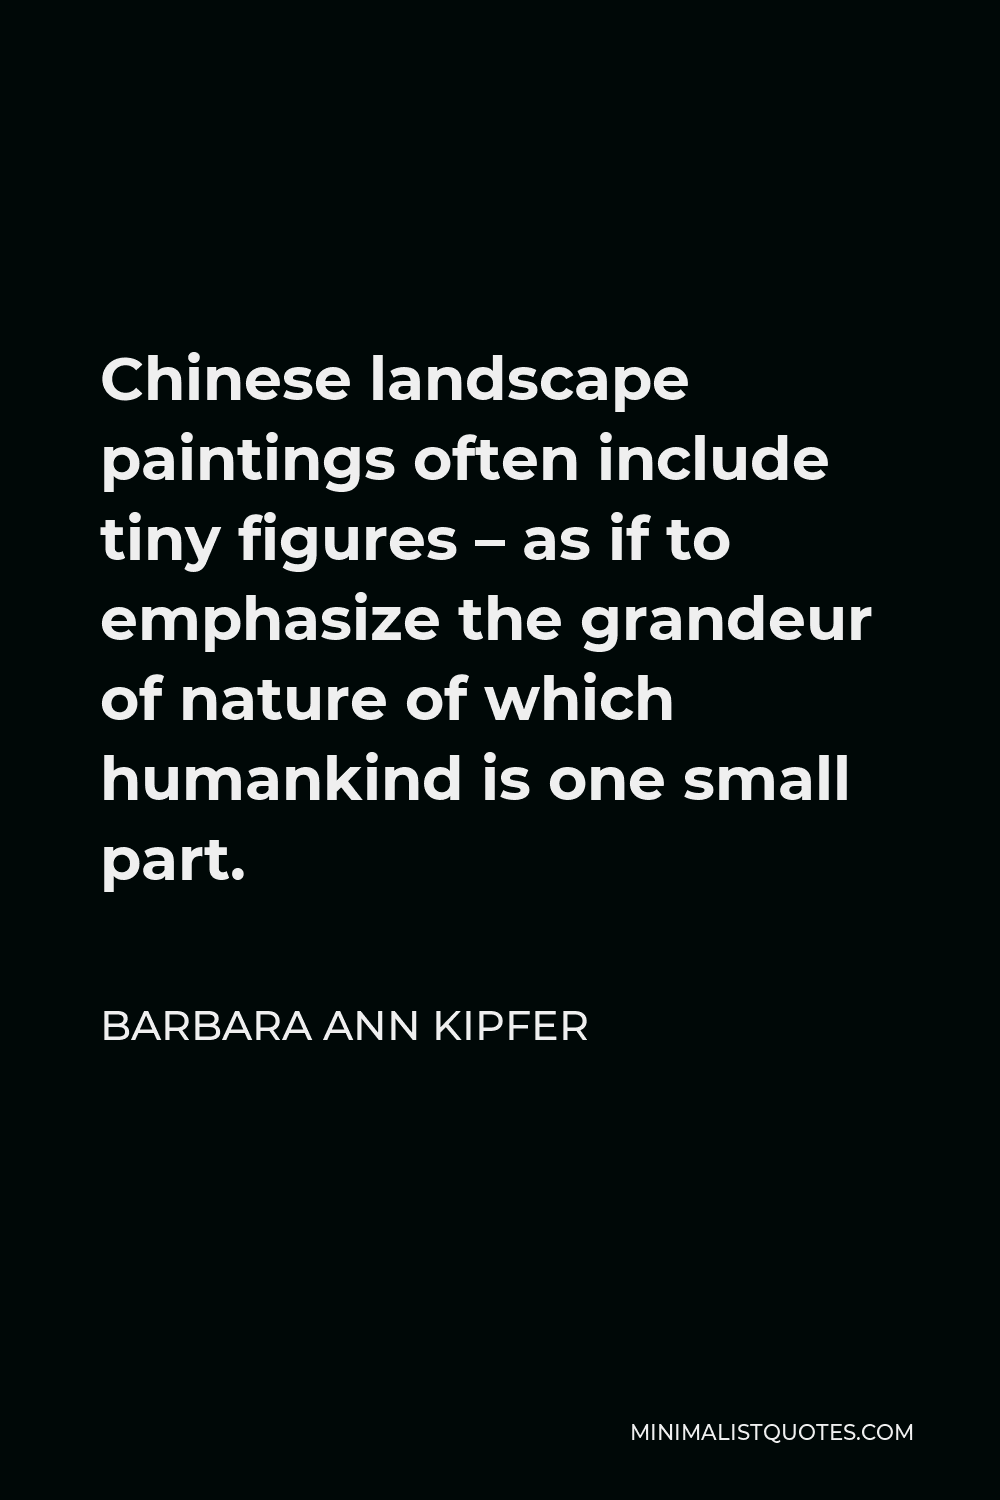 Barbara Ann Kipfer Quote - Chinese landscape paintings often include tiny figures – as if to emphasize the grandeur of nature of which humankind is one small part.